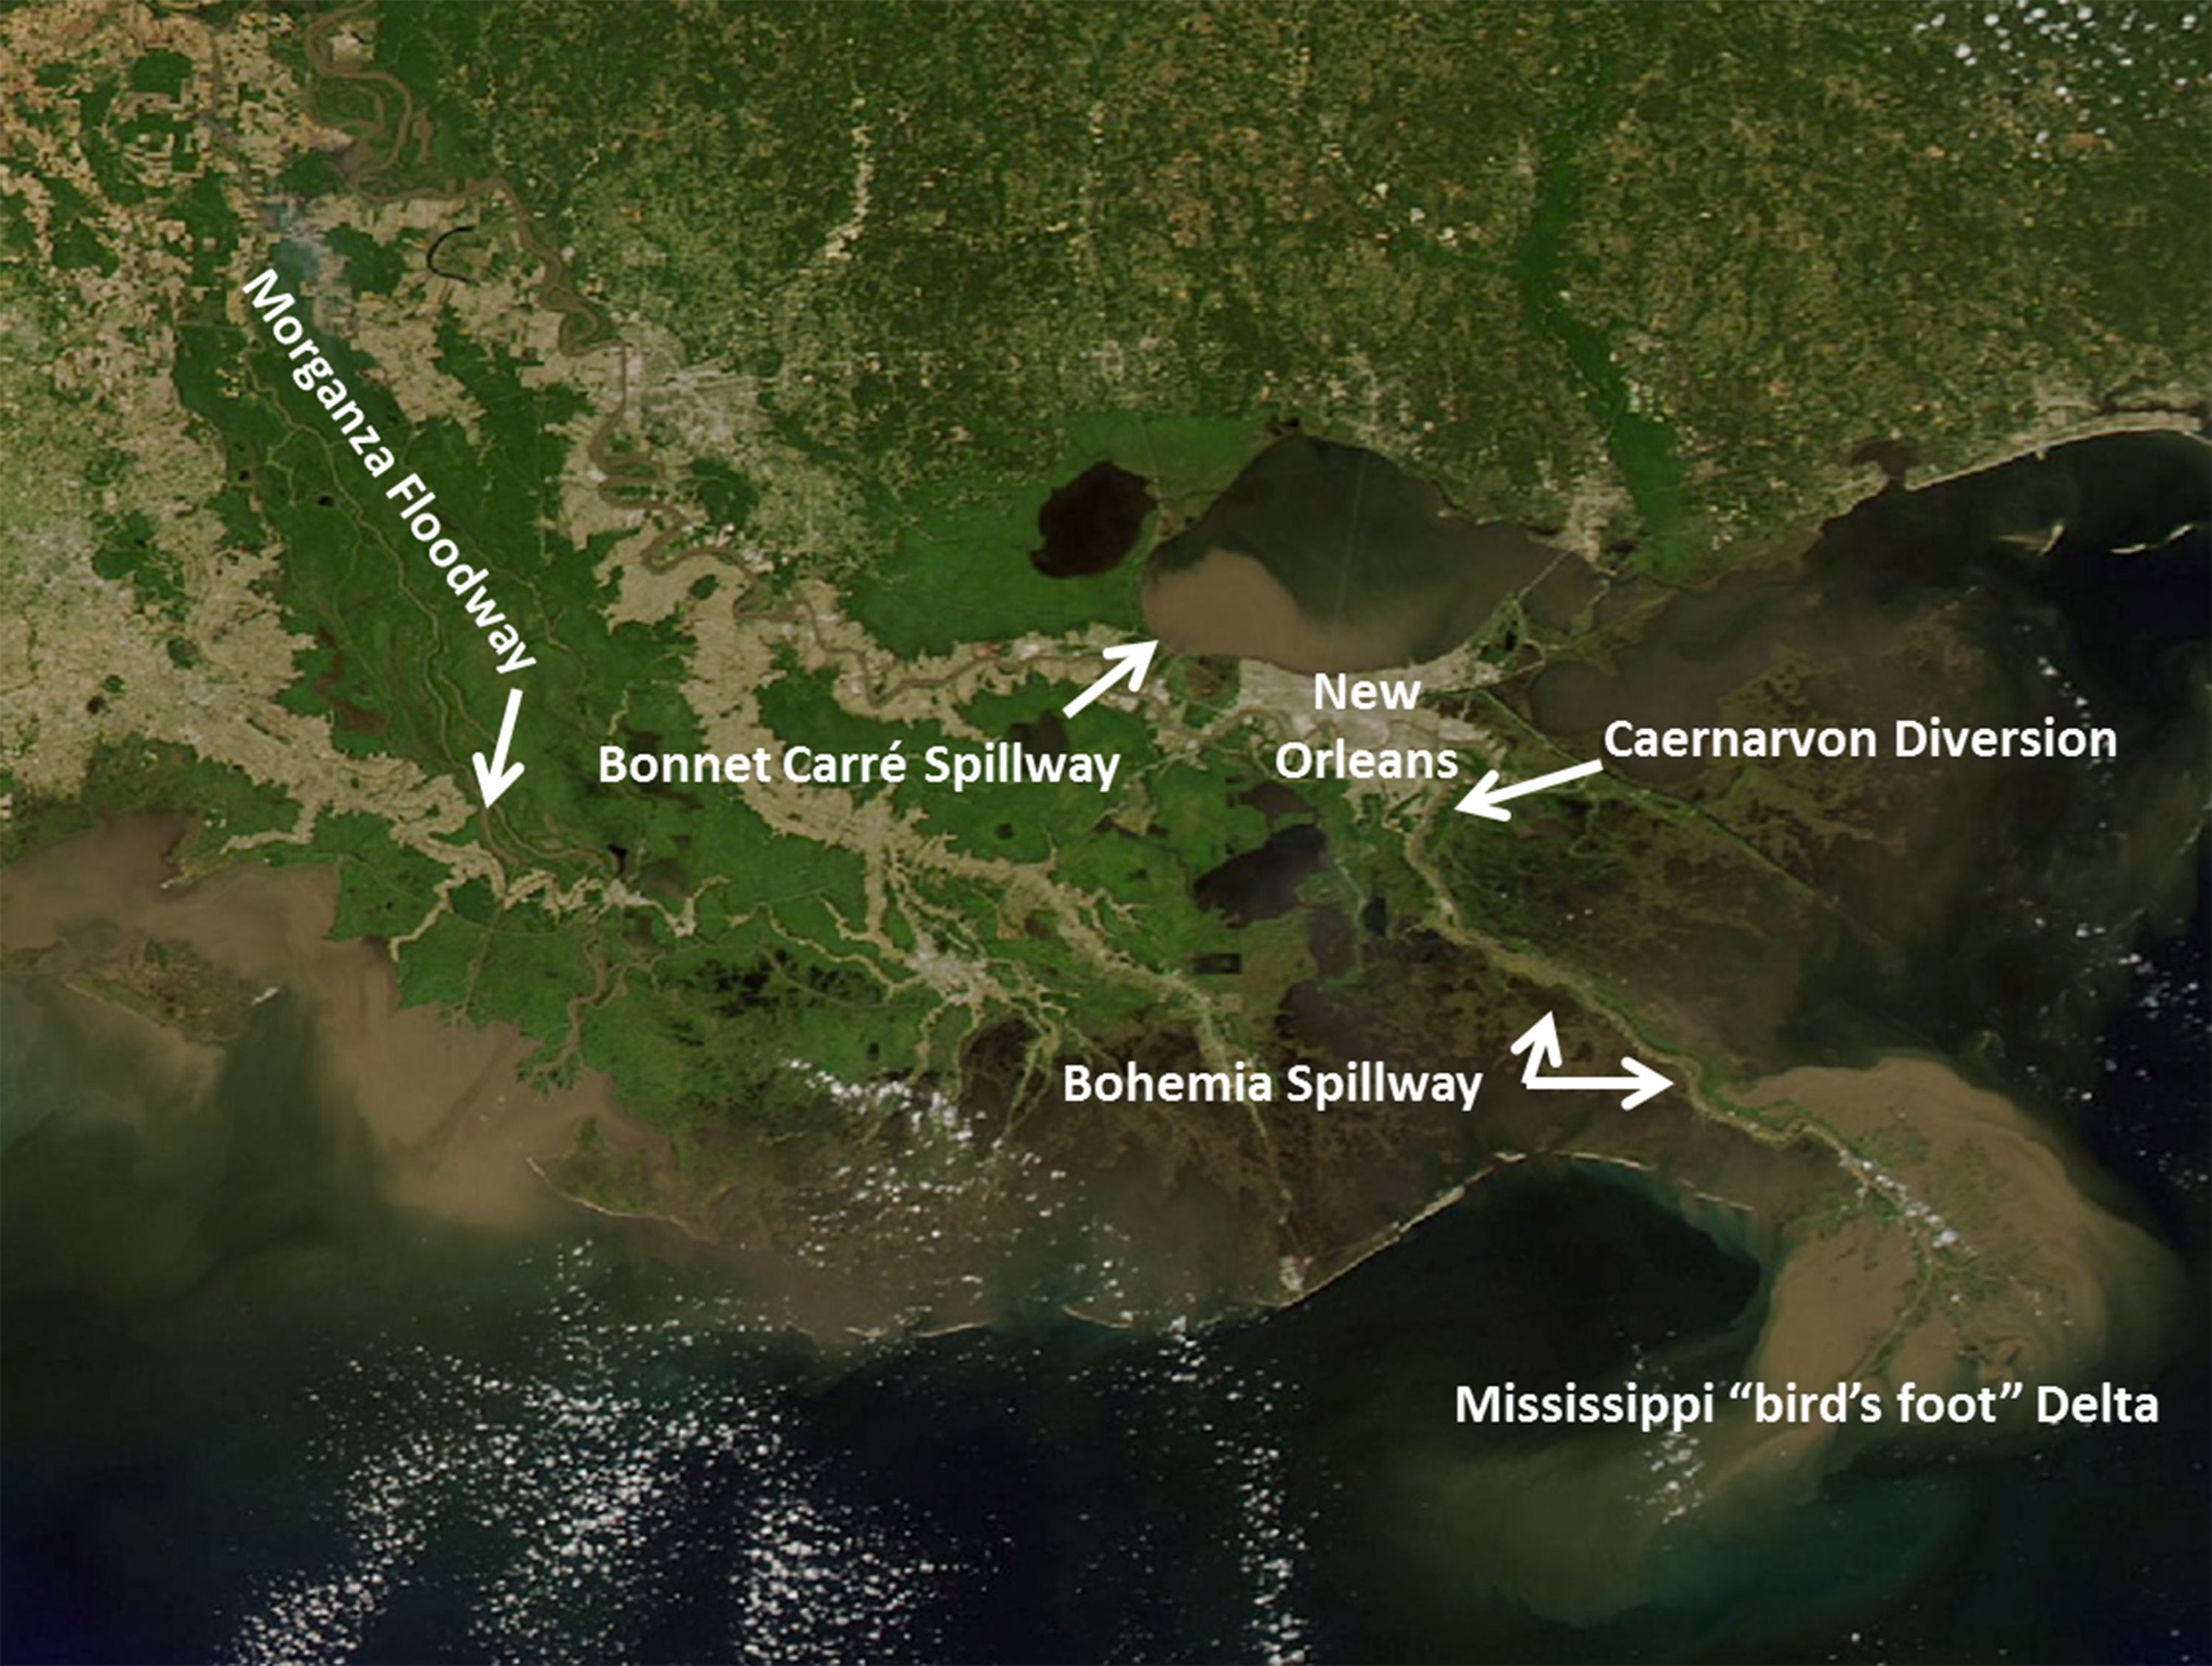 Location of the Caernarvon Diversion and Bohemia Spillway in relation to New Orleans and other river outlets.